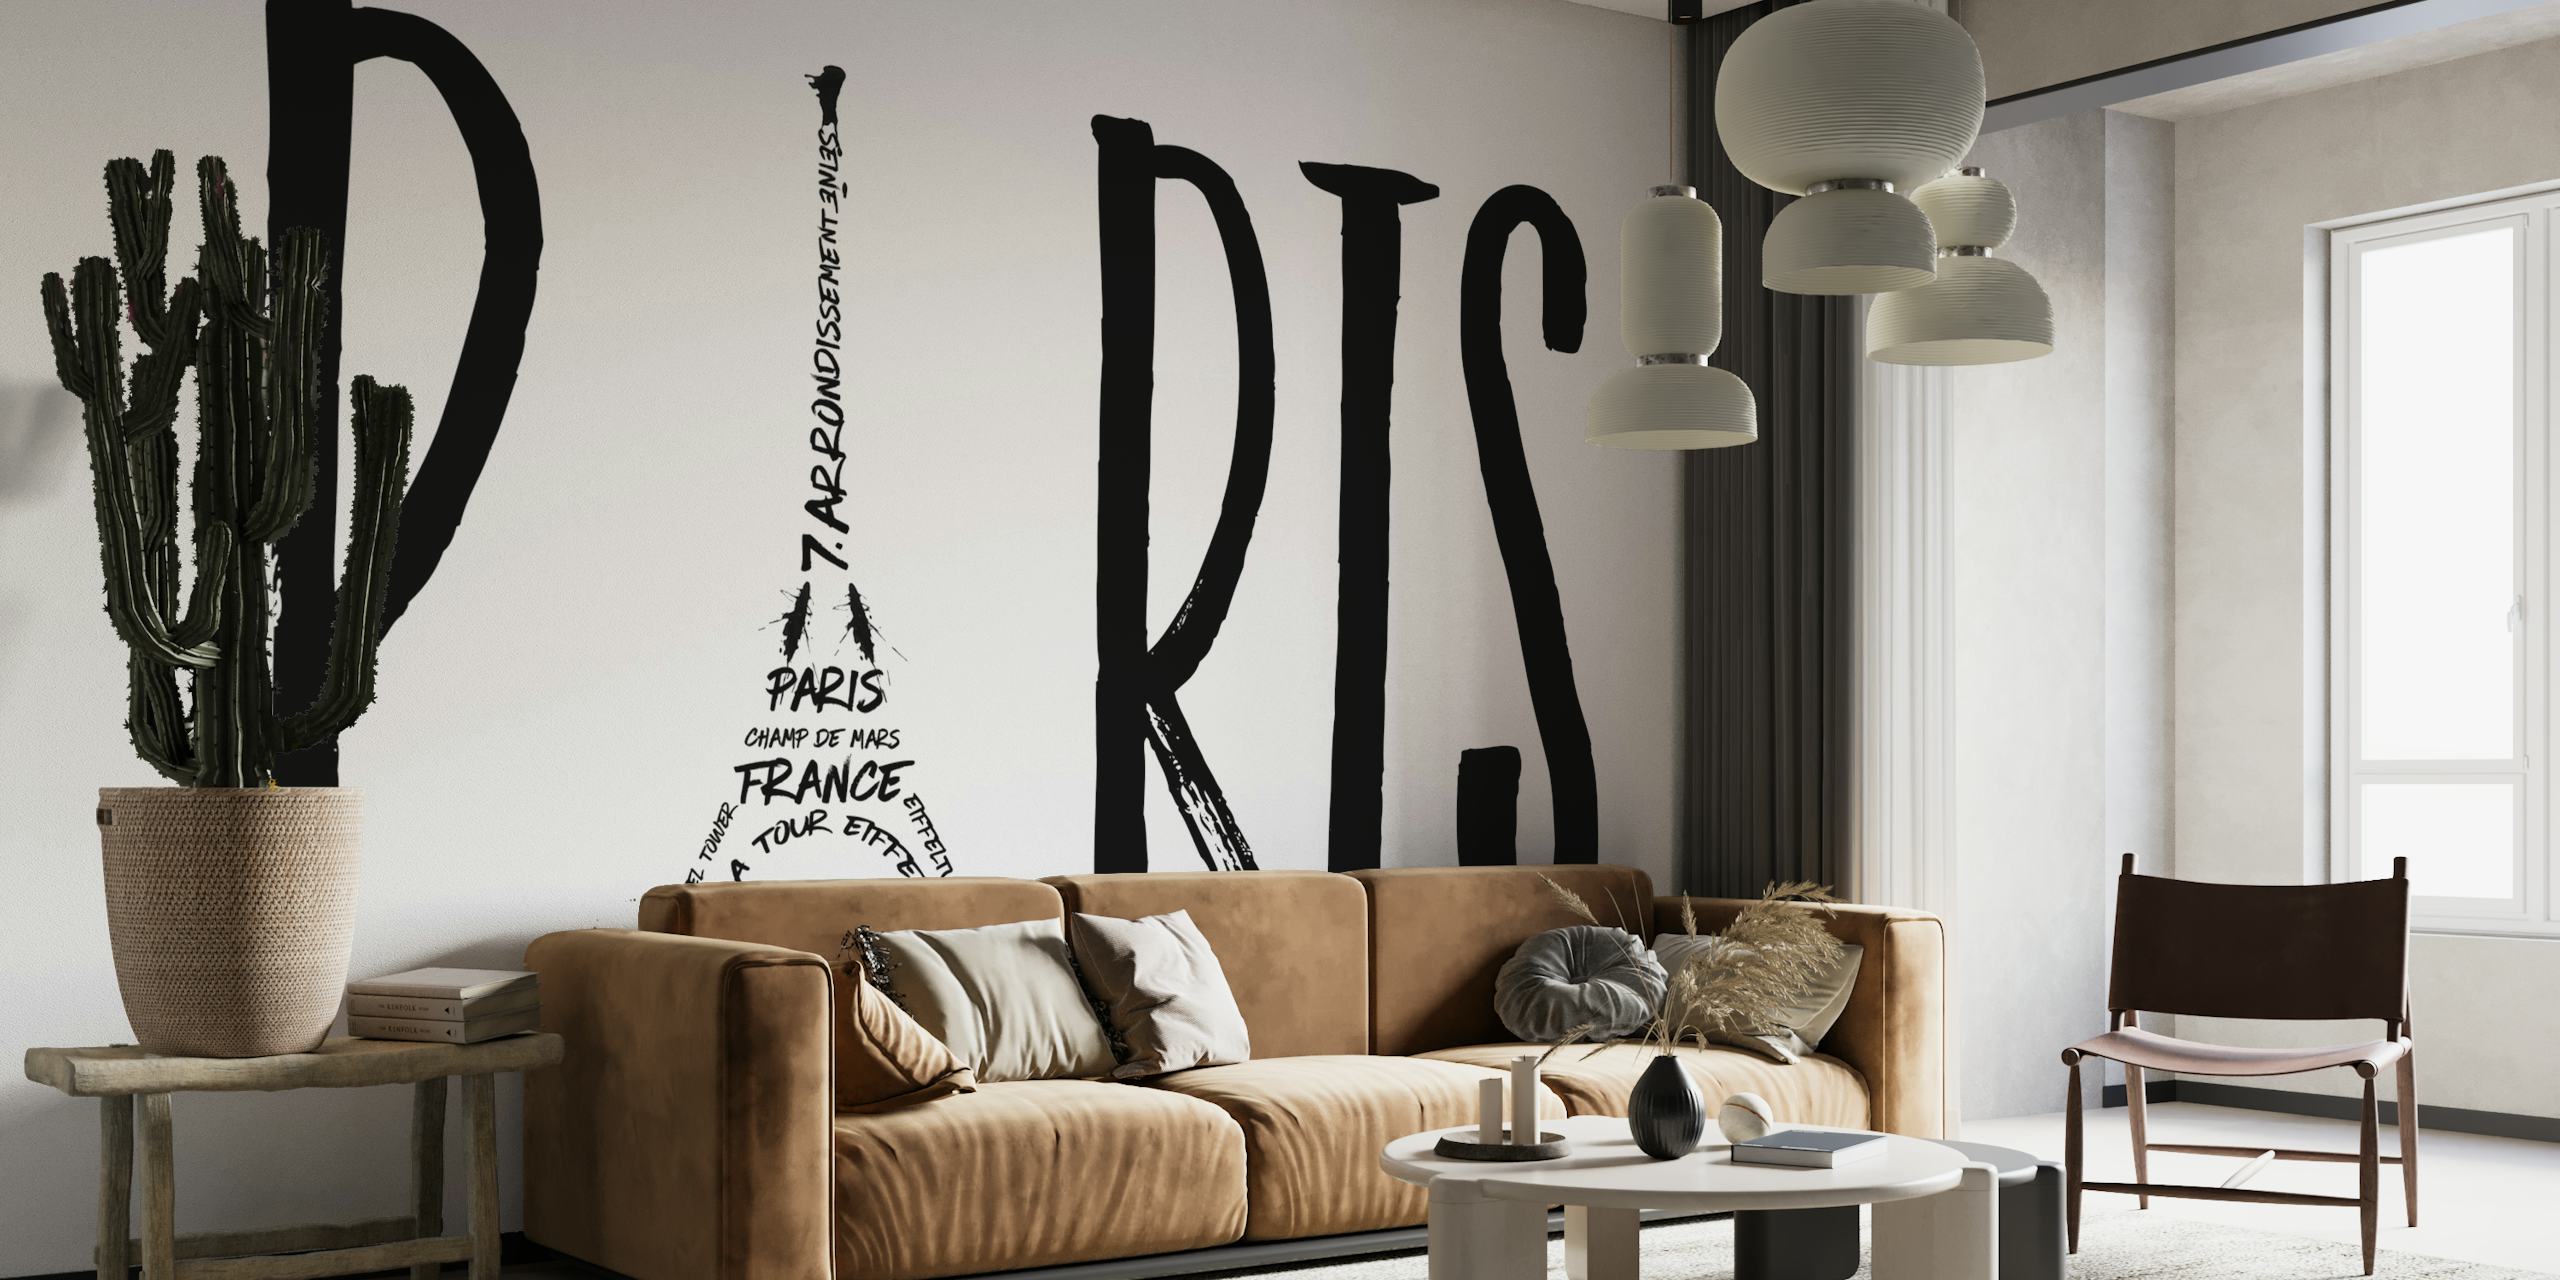 Black and white Paris typography art with Eiffel Tower integrated into the design